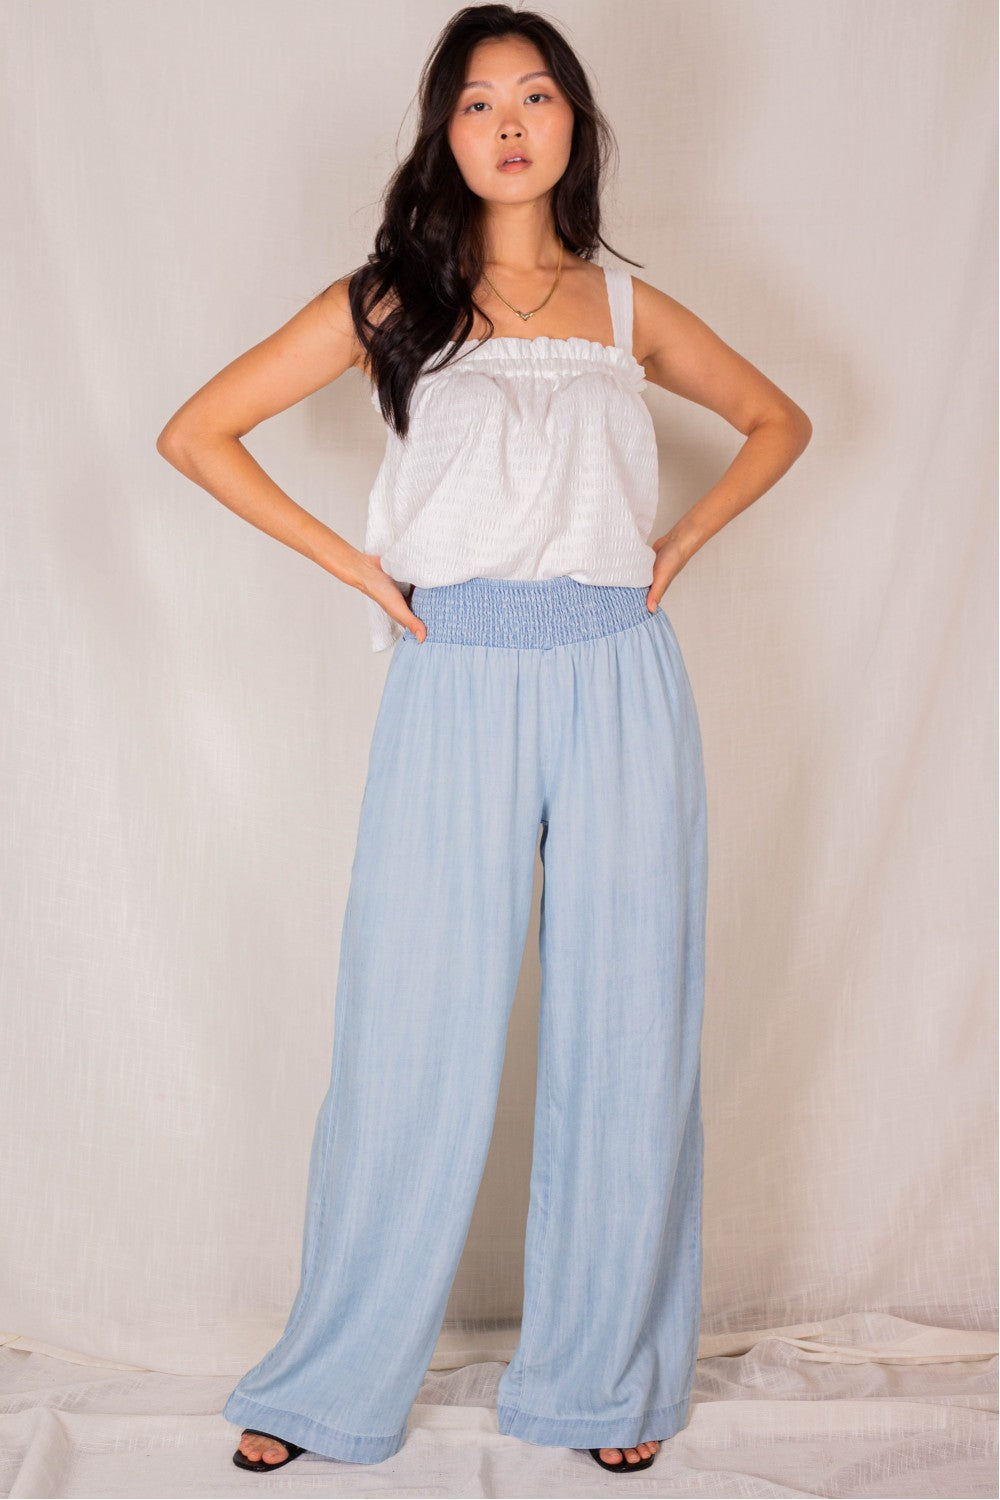 BEFORE YOU COLLECTION TENCIL WIDE LEG PANTS WITH A SHIRRED WAIST LT WASH